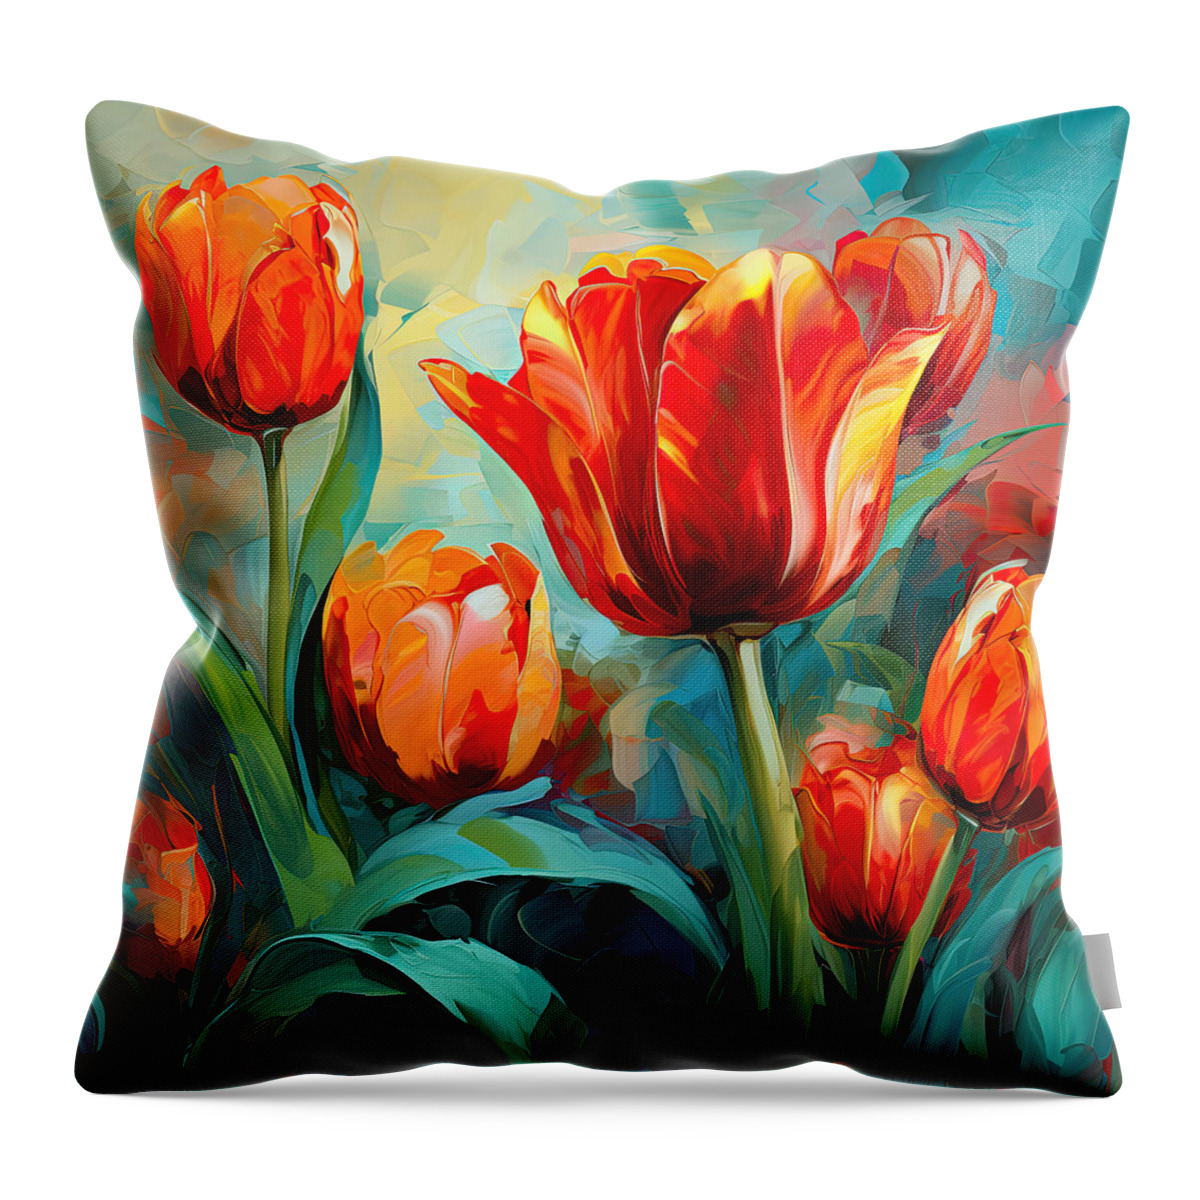 Red Tulips Throw Pillow featuring the digital art Devotion To One's Love - Red Tulips Painting by Lourry Legarde